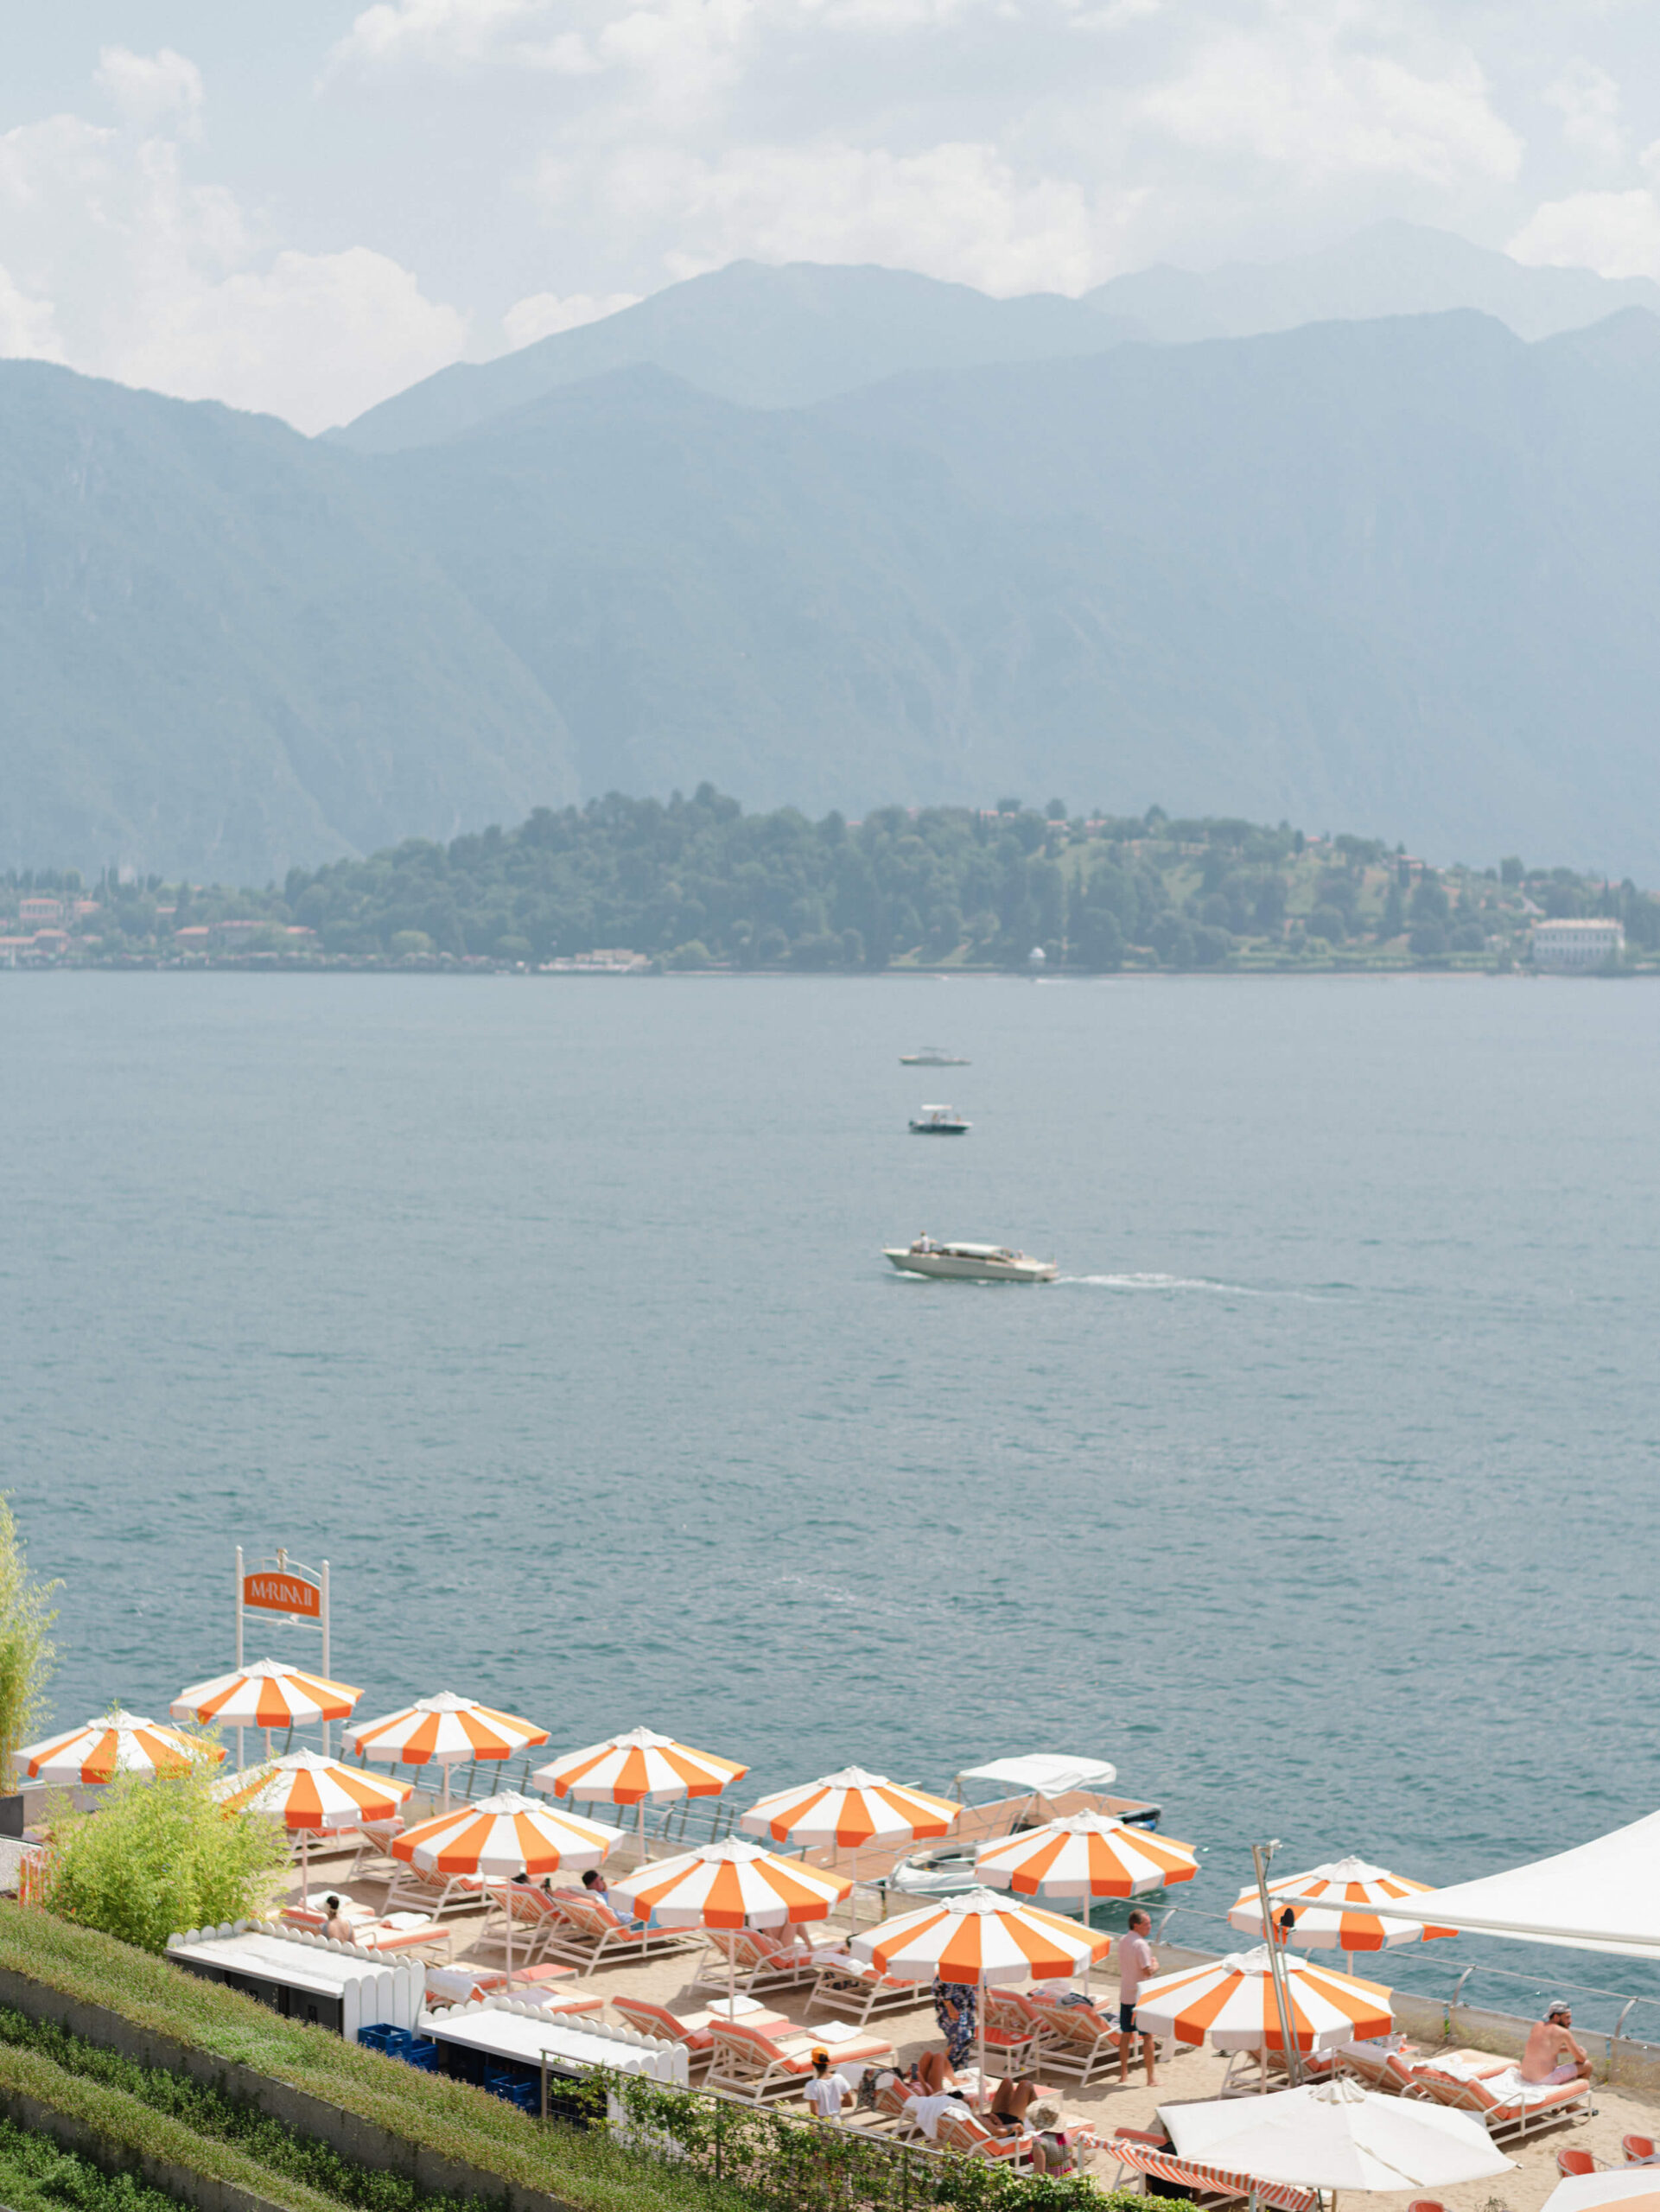 Umbrellas on the shores of Lake Como, boats in the distance